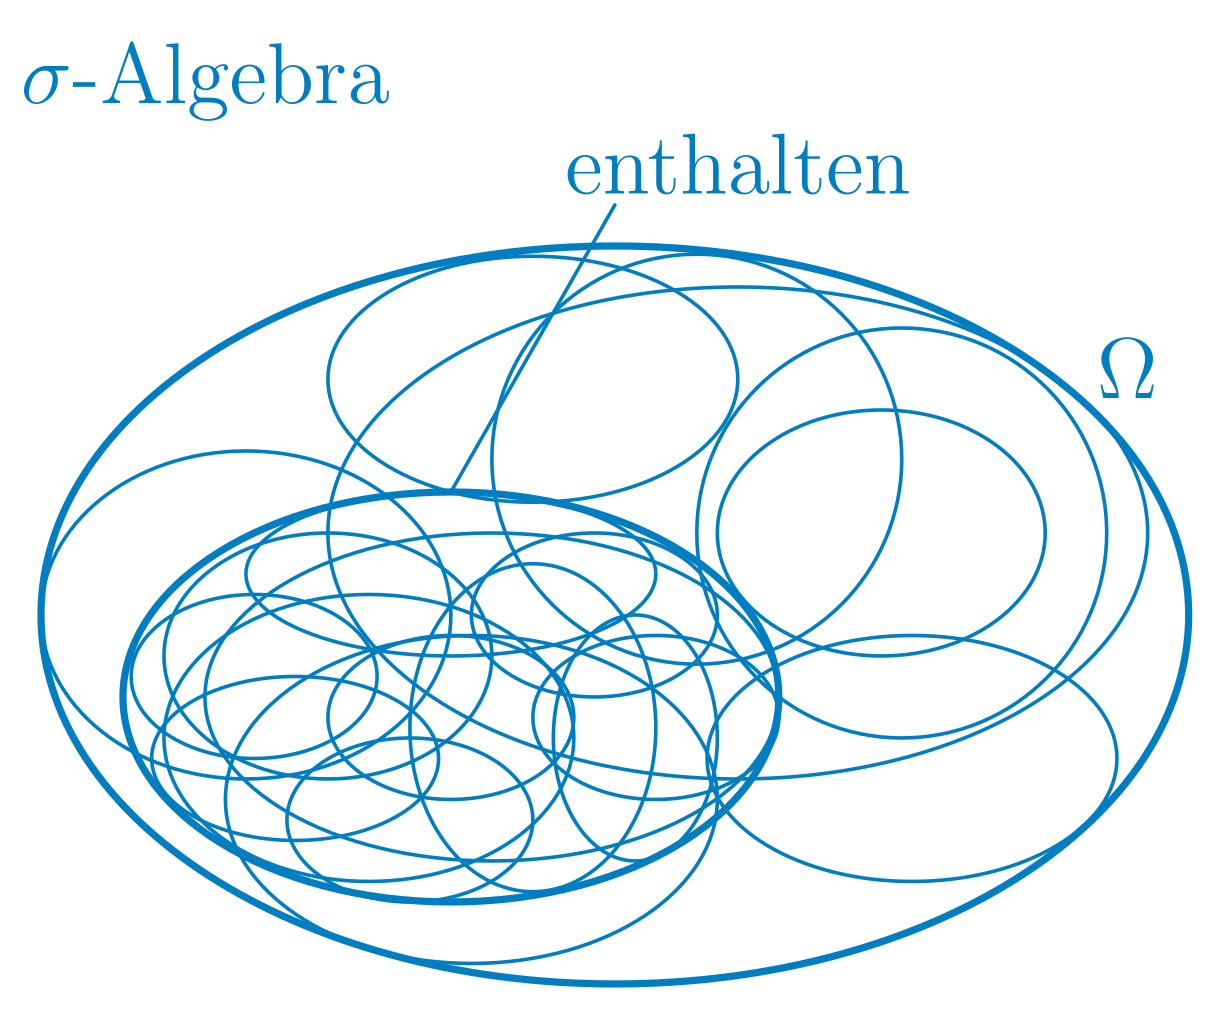 Why do we need sigma algebras to define probability spaces?